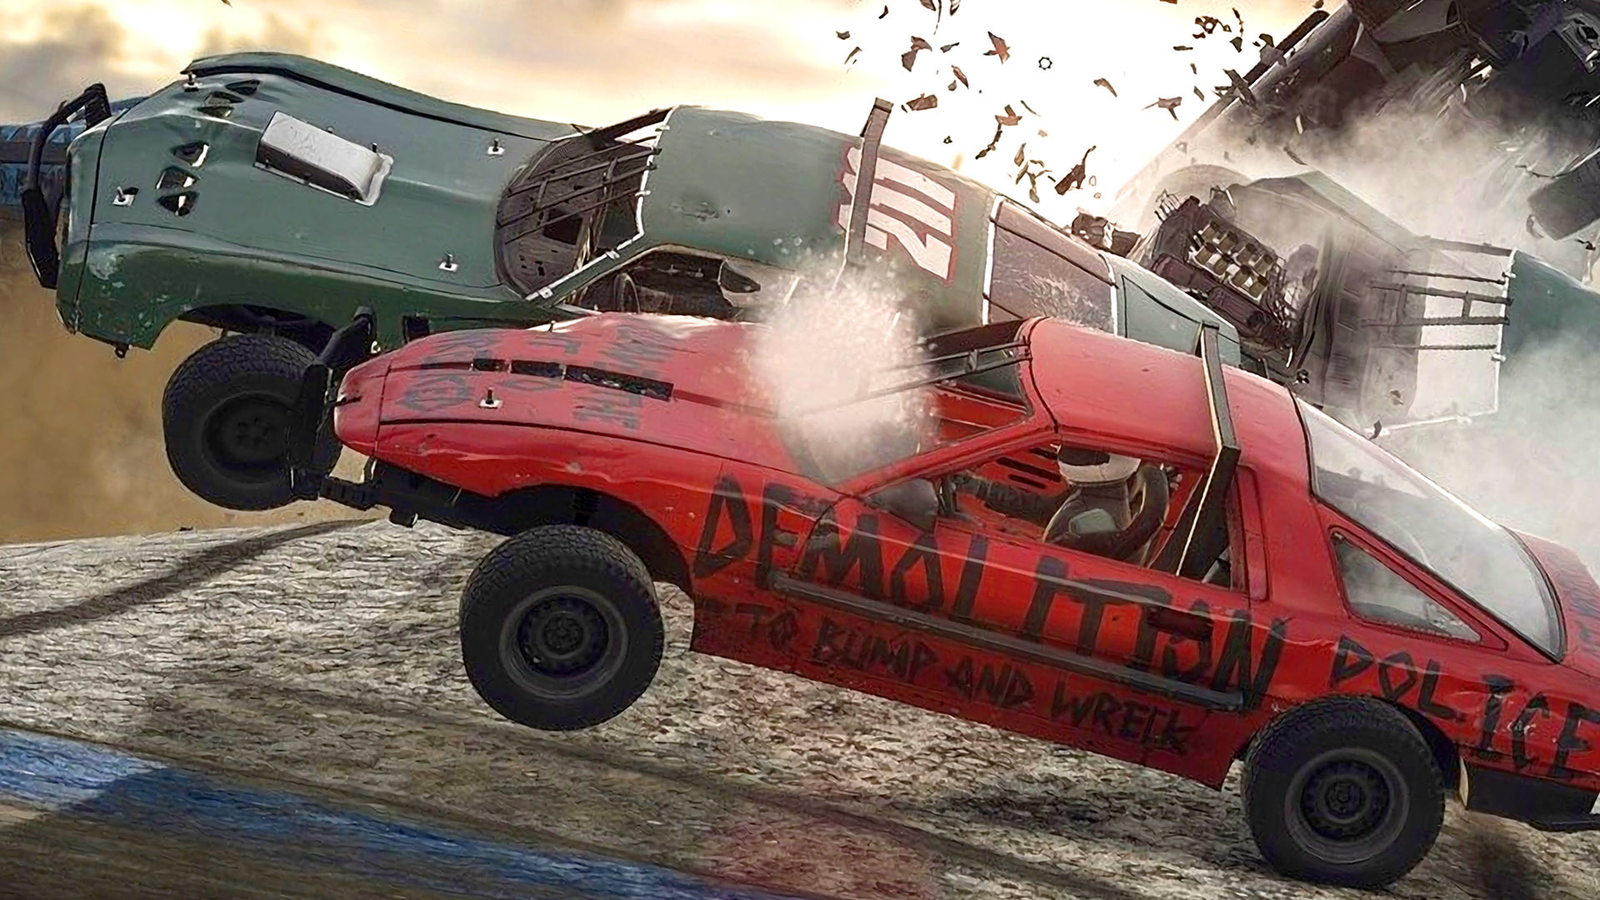 PS5 PlayStation Plus subscribers can get Wreckfest: Drive Hard